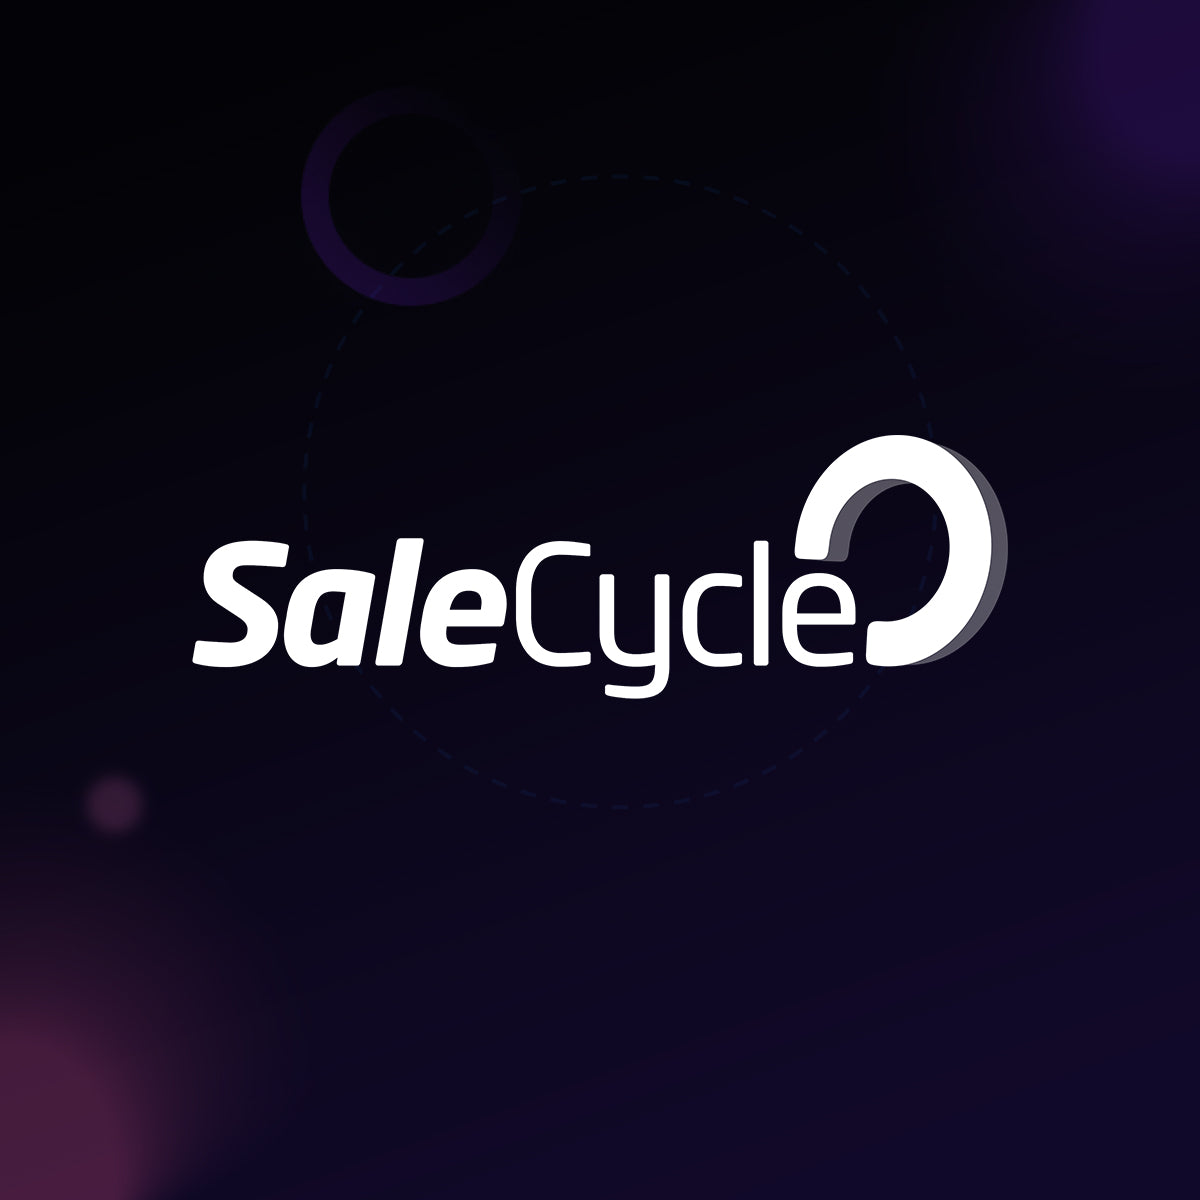 Hire Shopify Experts to integrate SaleCycle app into a Shopify store